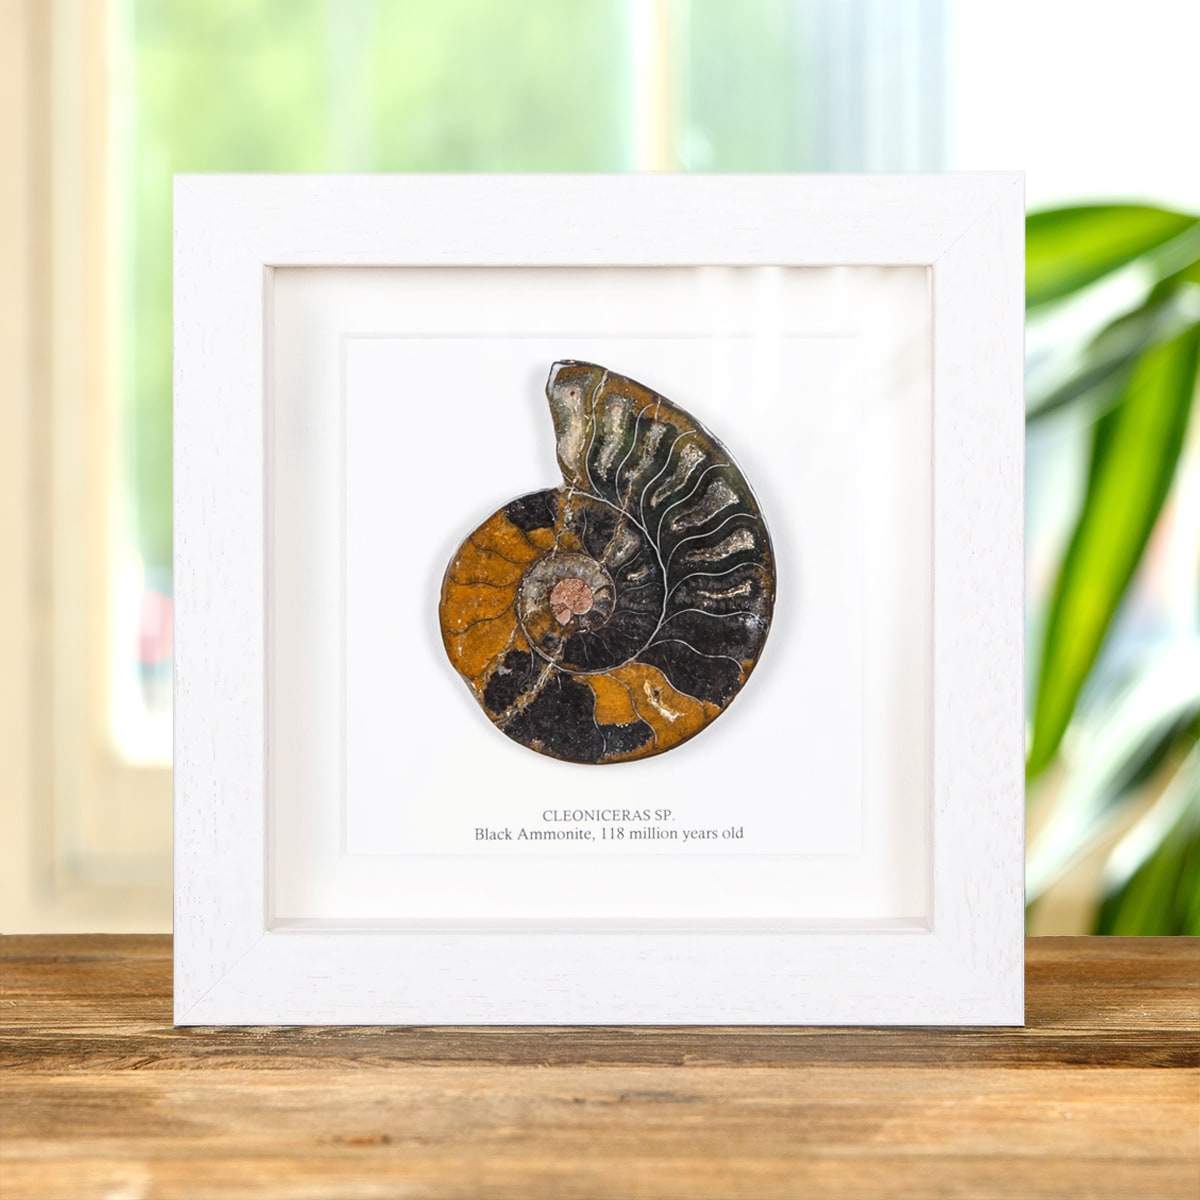 Black Ammonite Cut and Polished Fossil in Box Frame (Cleoniceras sp) - Specimen #01